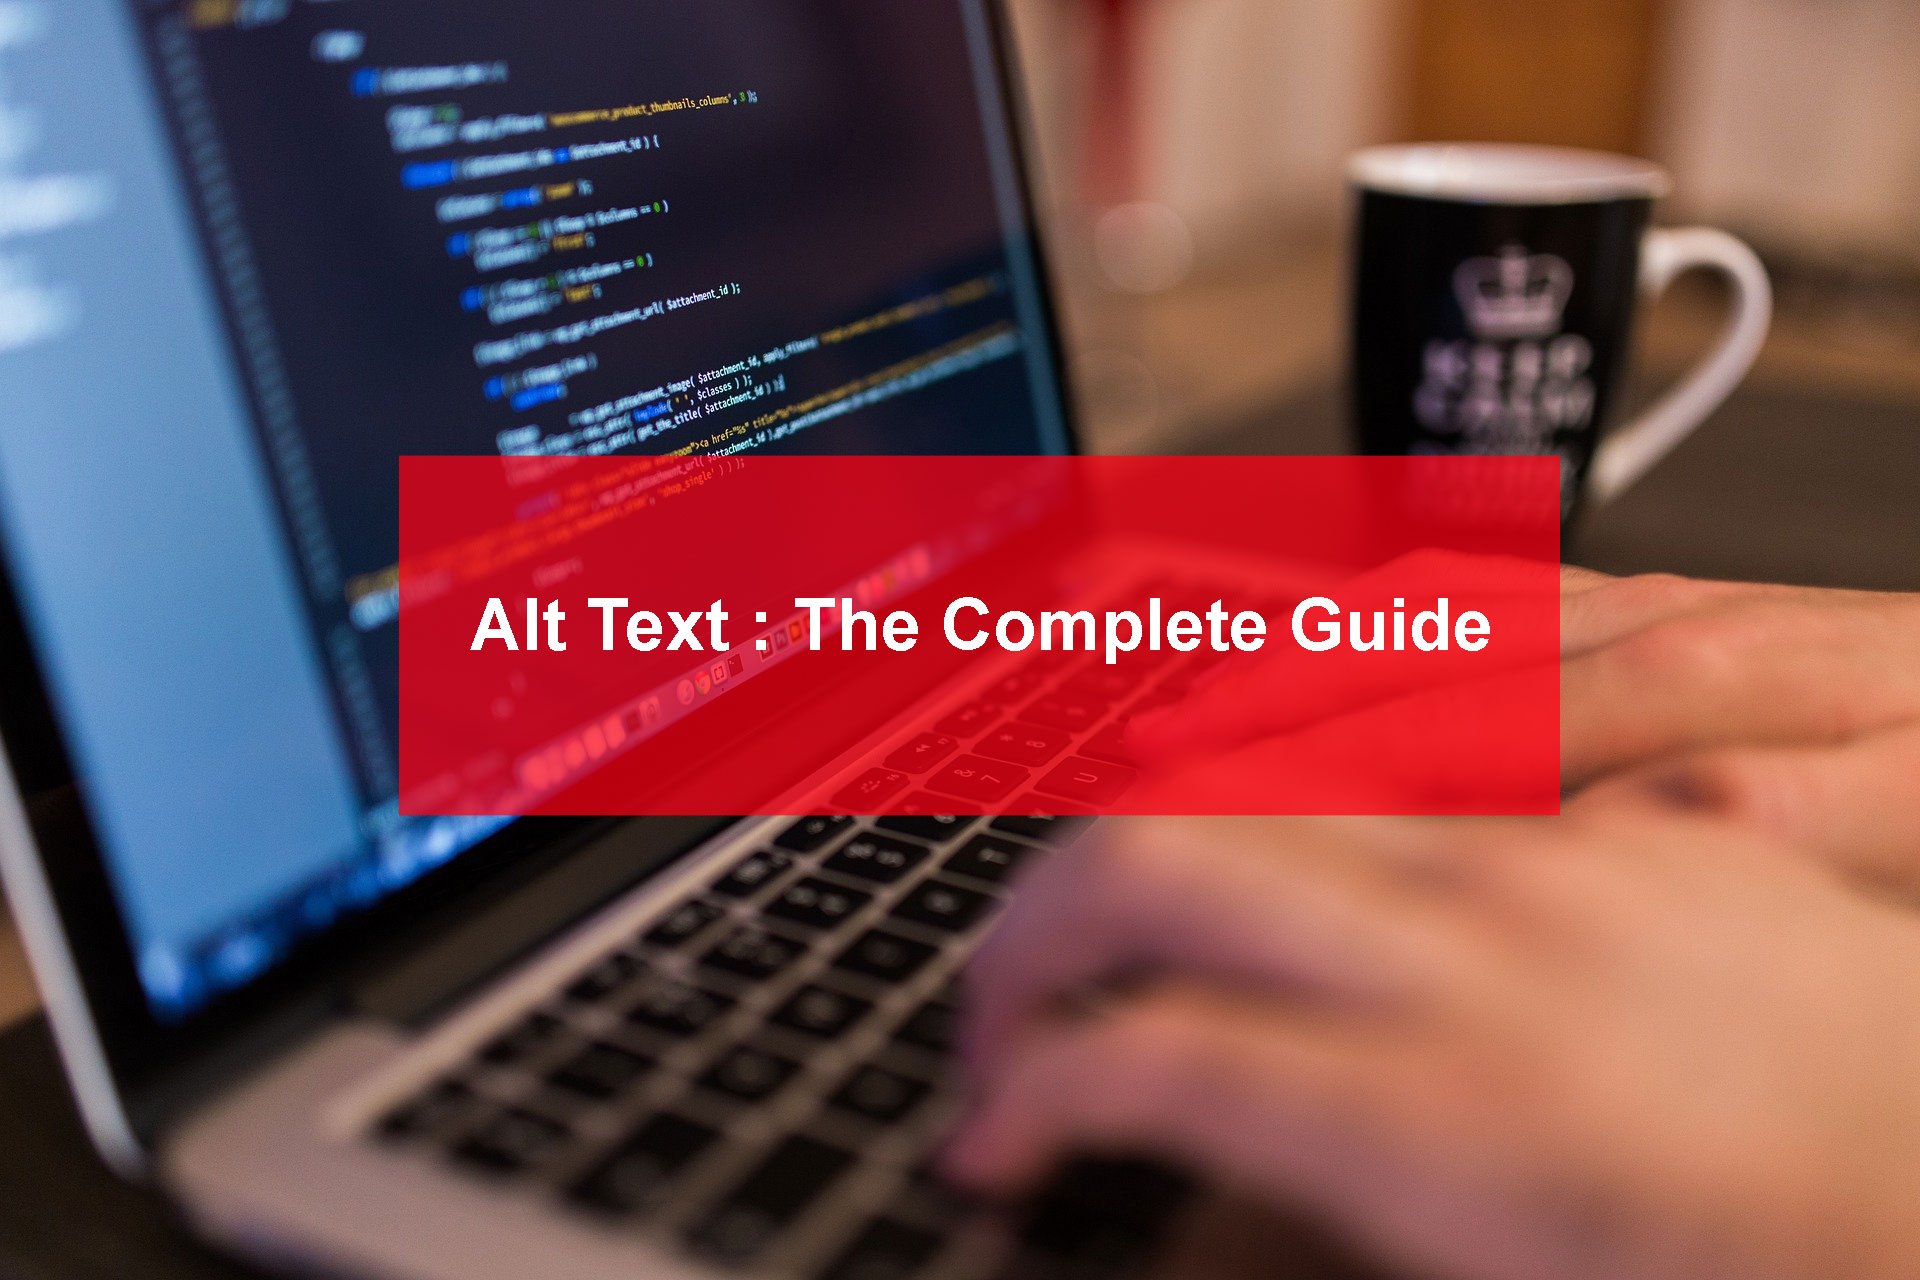 Complete Guide to Alt Text